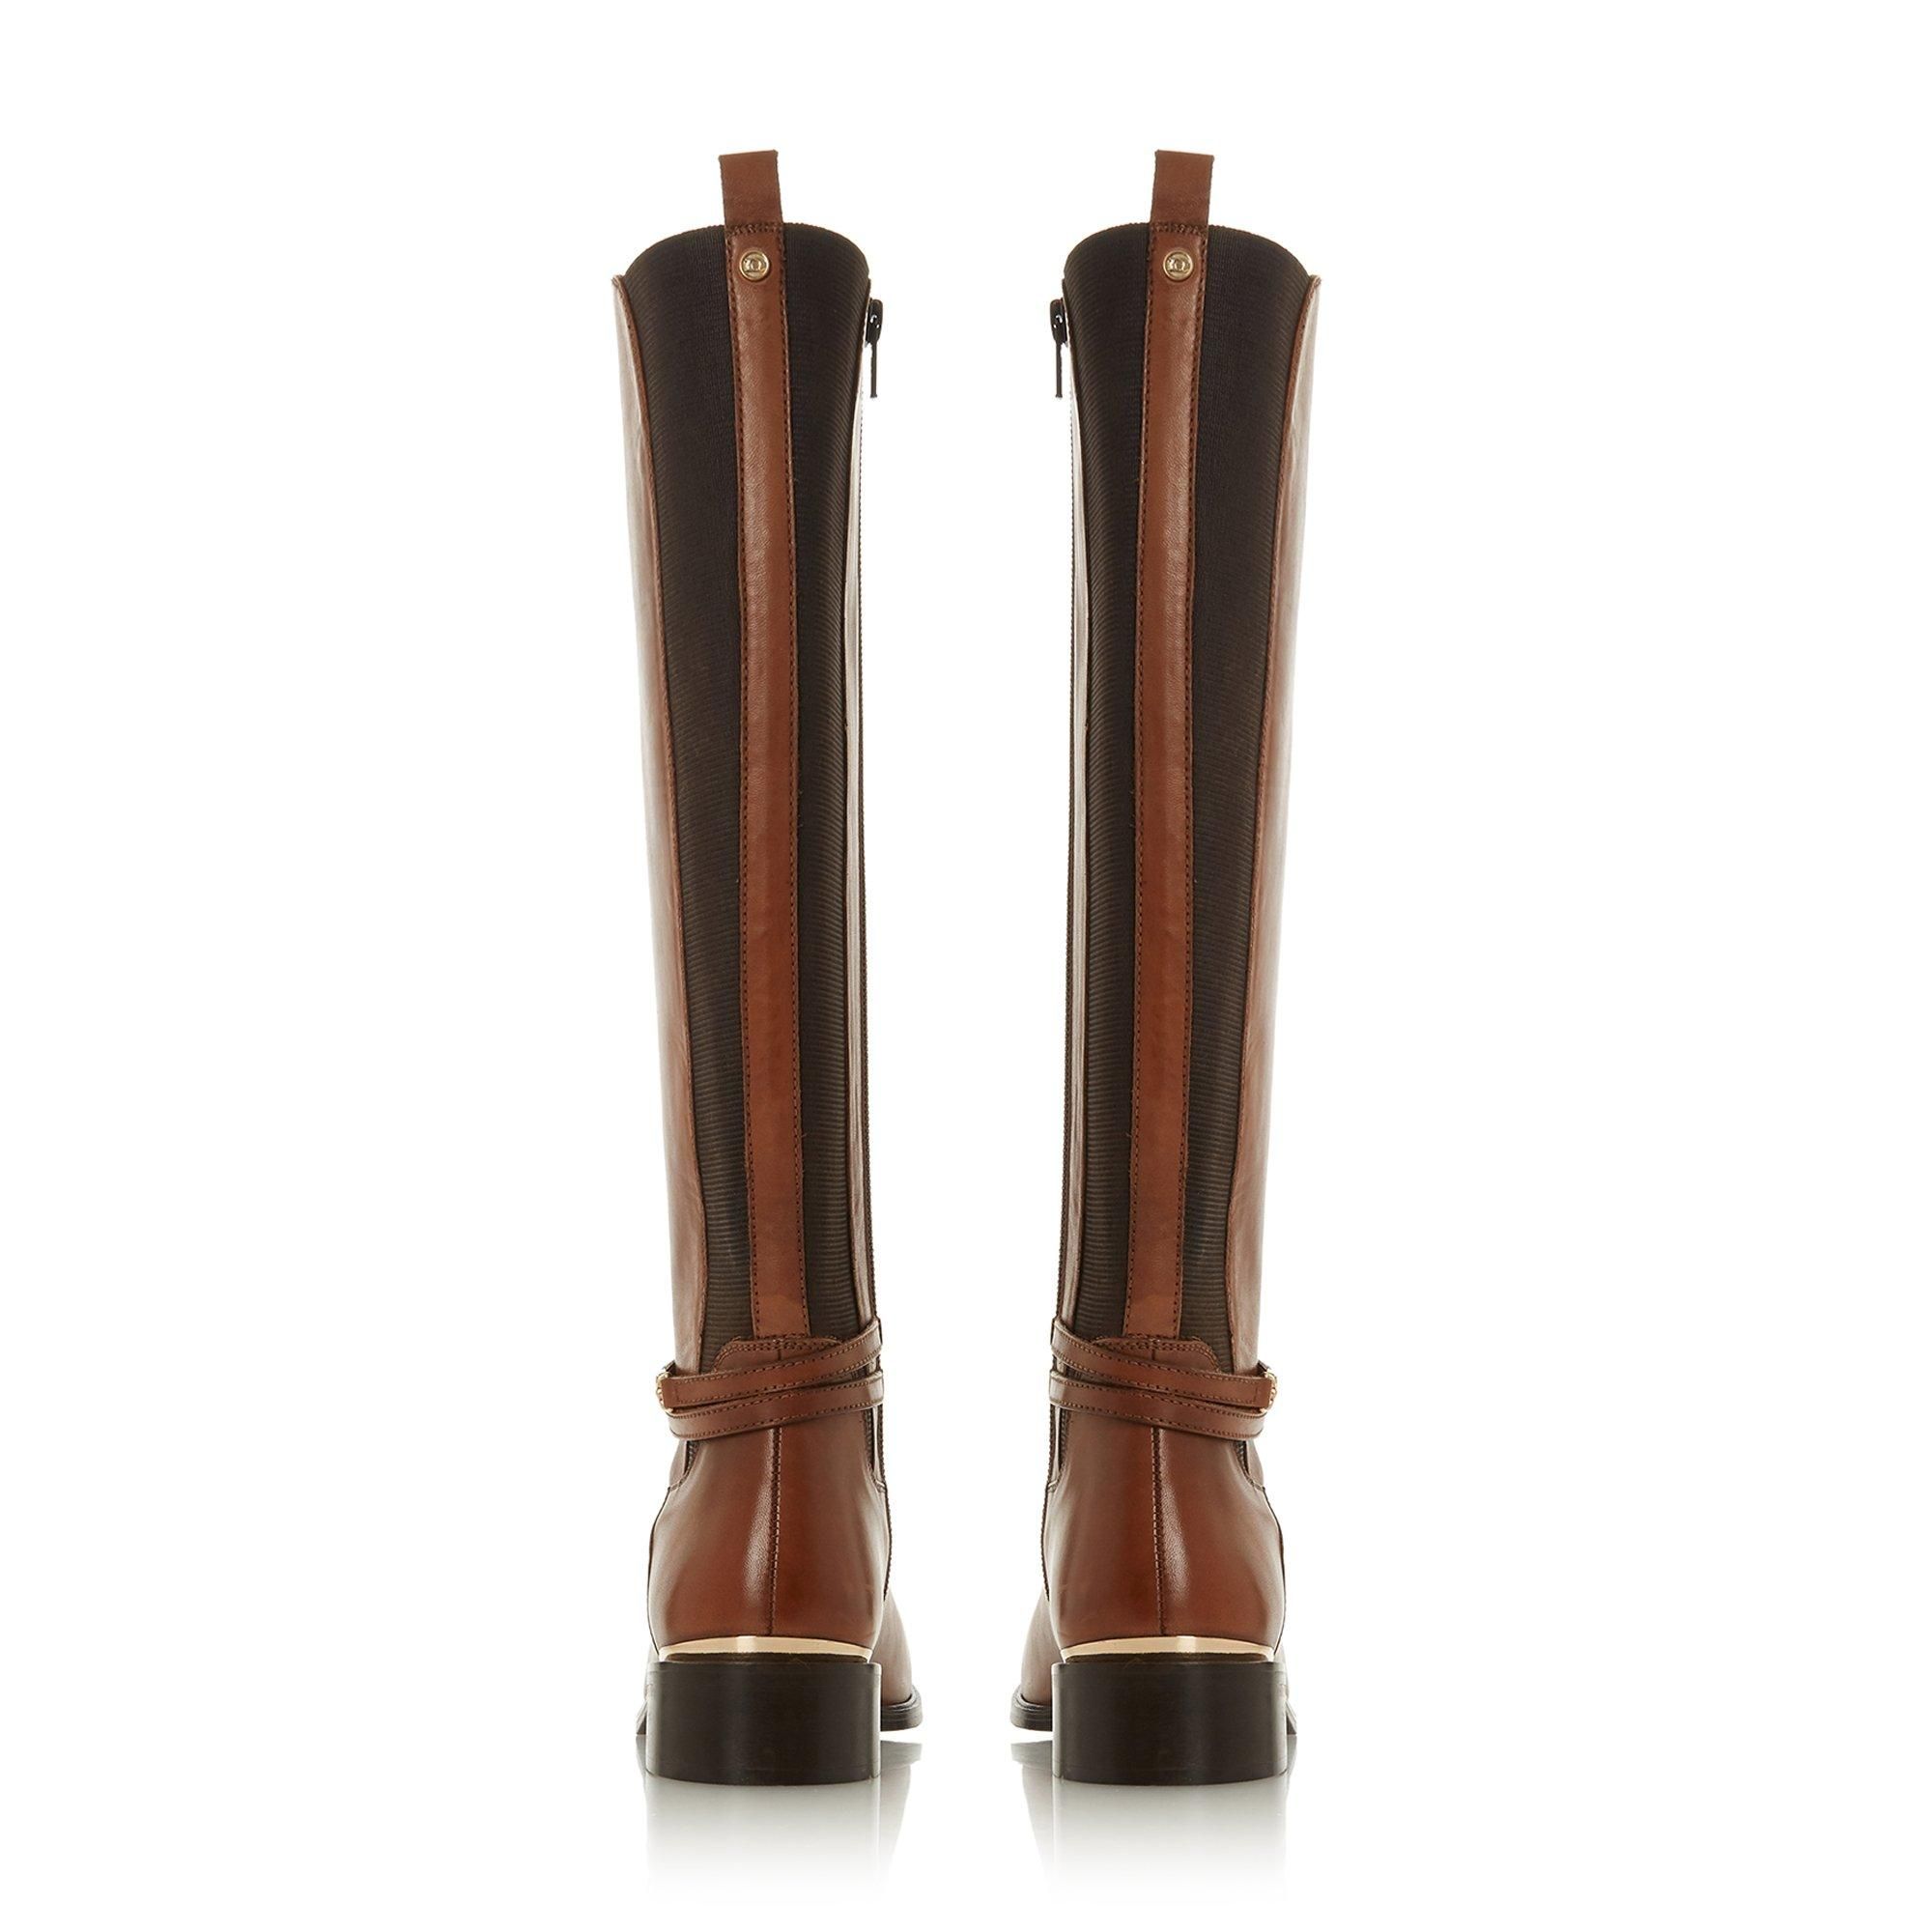 Update your look with this chic Dune London Traviss knee high boot. Featuring a stylish almond toe and metal details on the heel and ankle. A flat block heel completes this comfortable and versatile style.